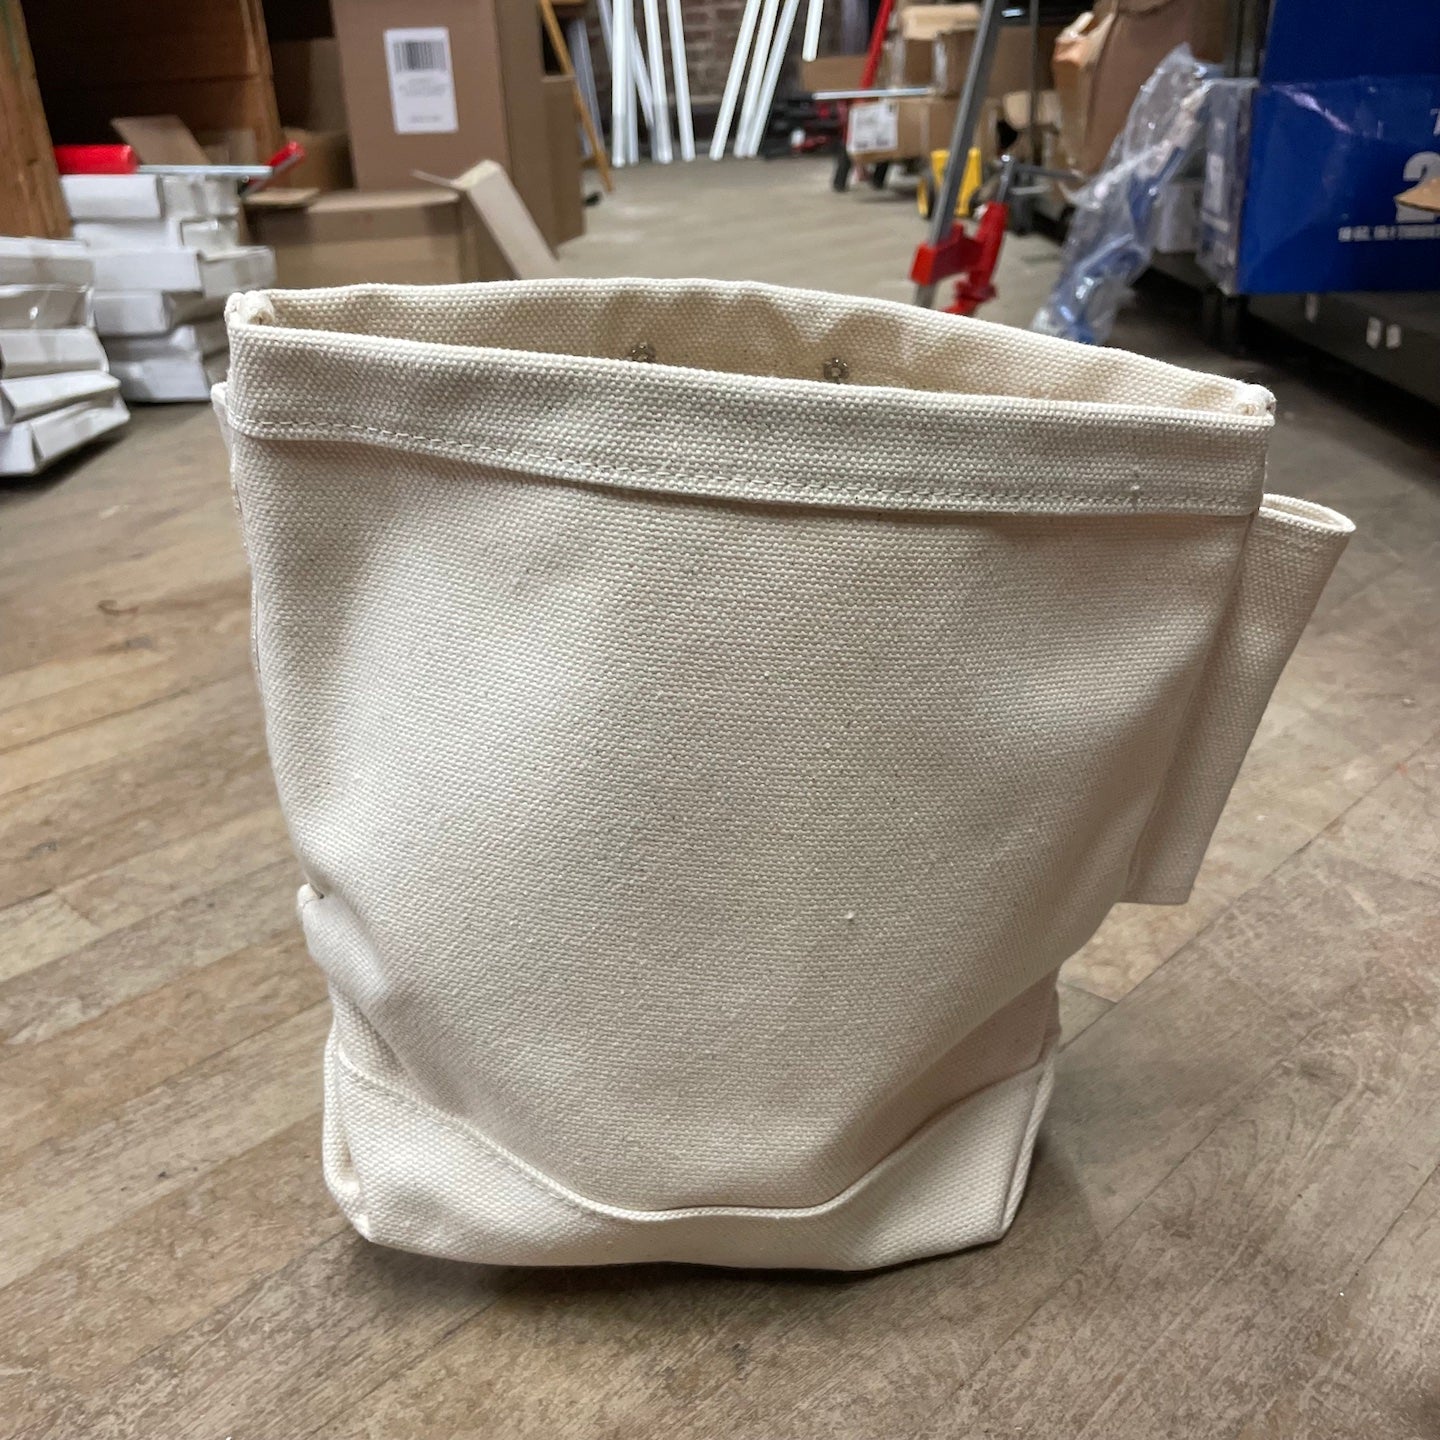 Iron Worker's US Made Canvas Bolt Bag (n-70)